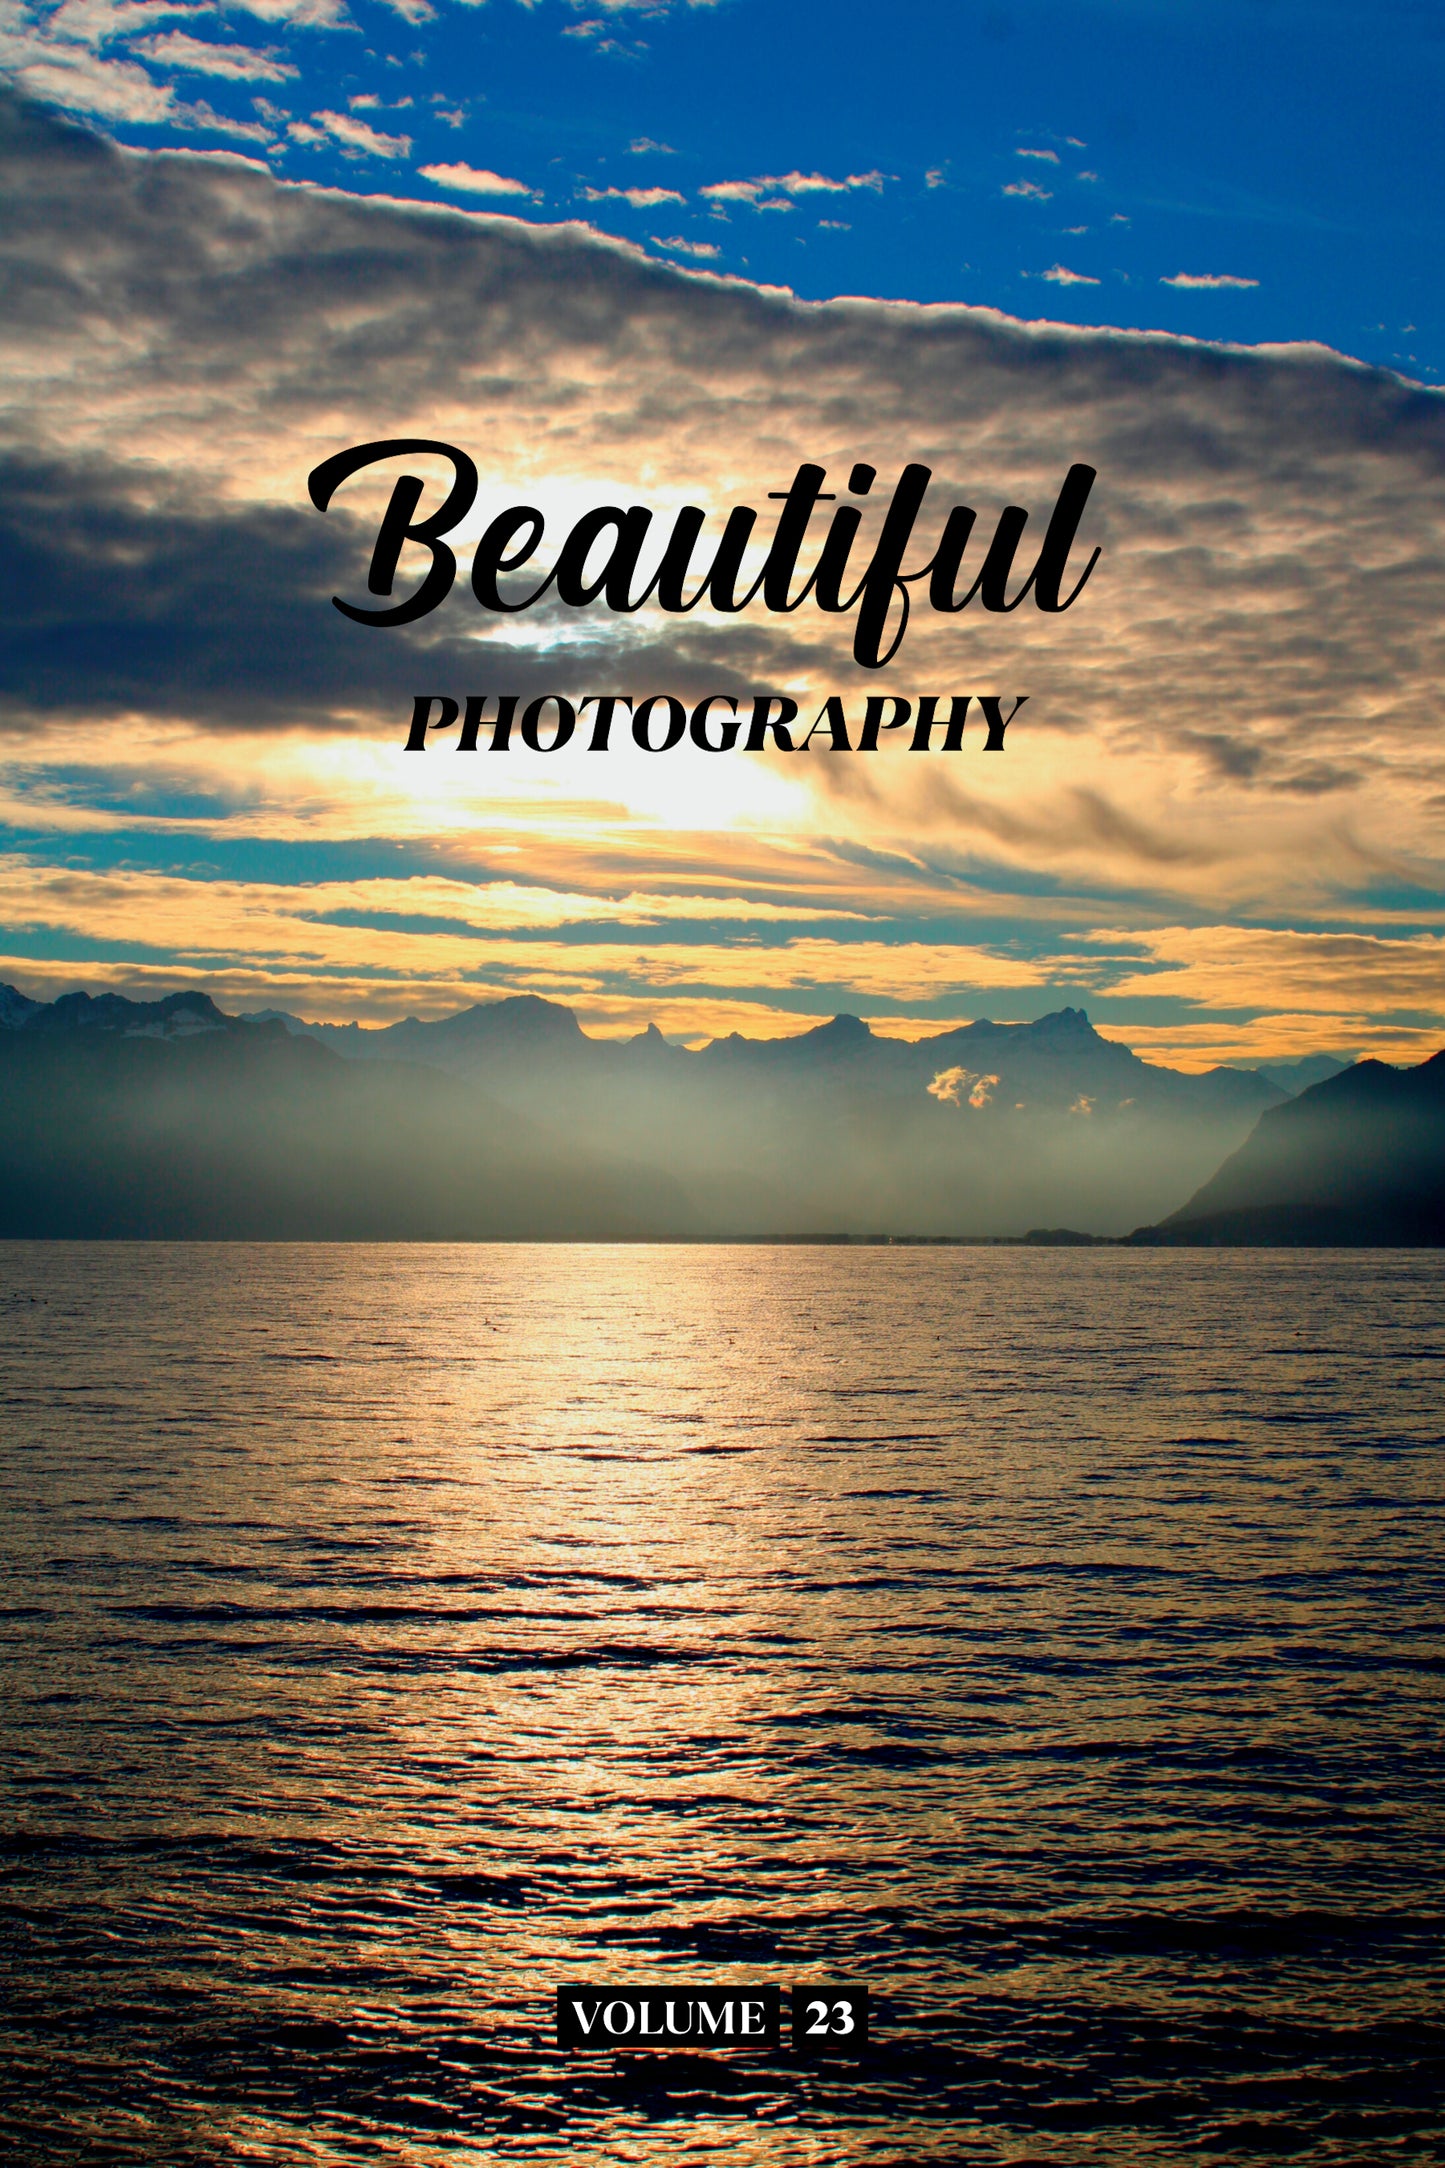 Beautiful Photography Volume 23 (Physical Book Pre-Order)